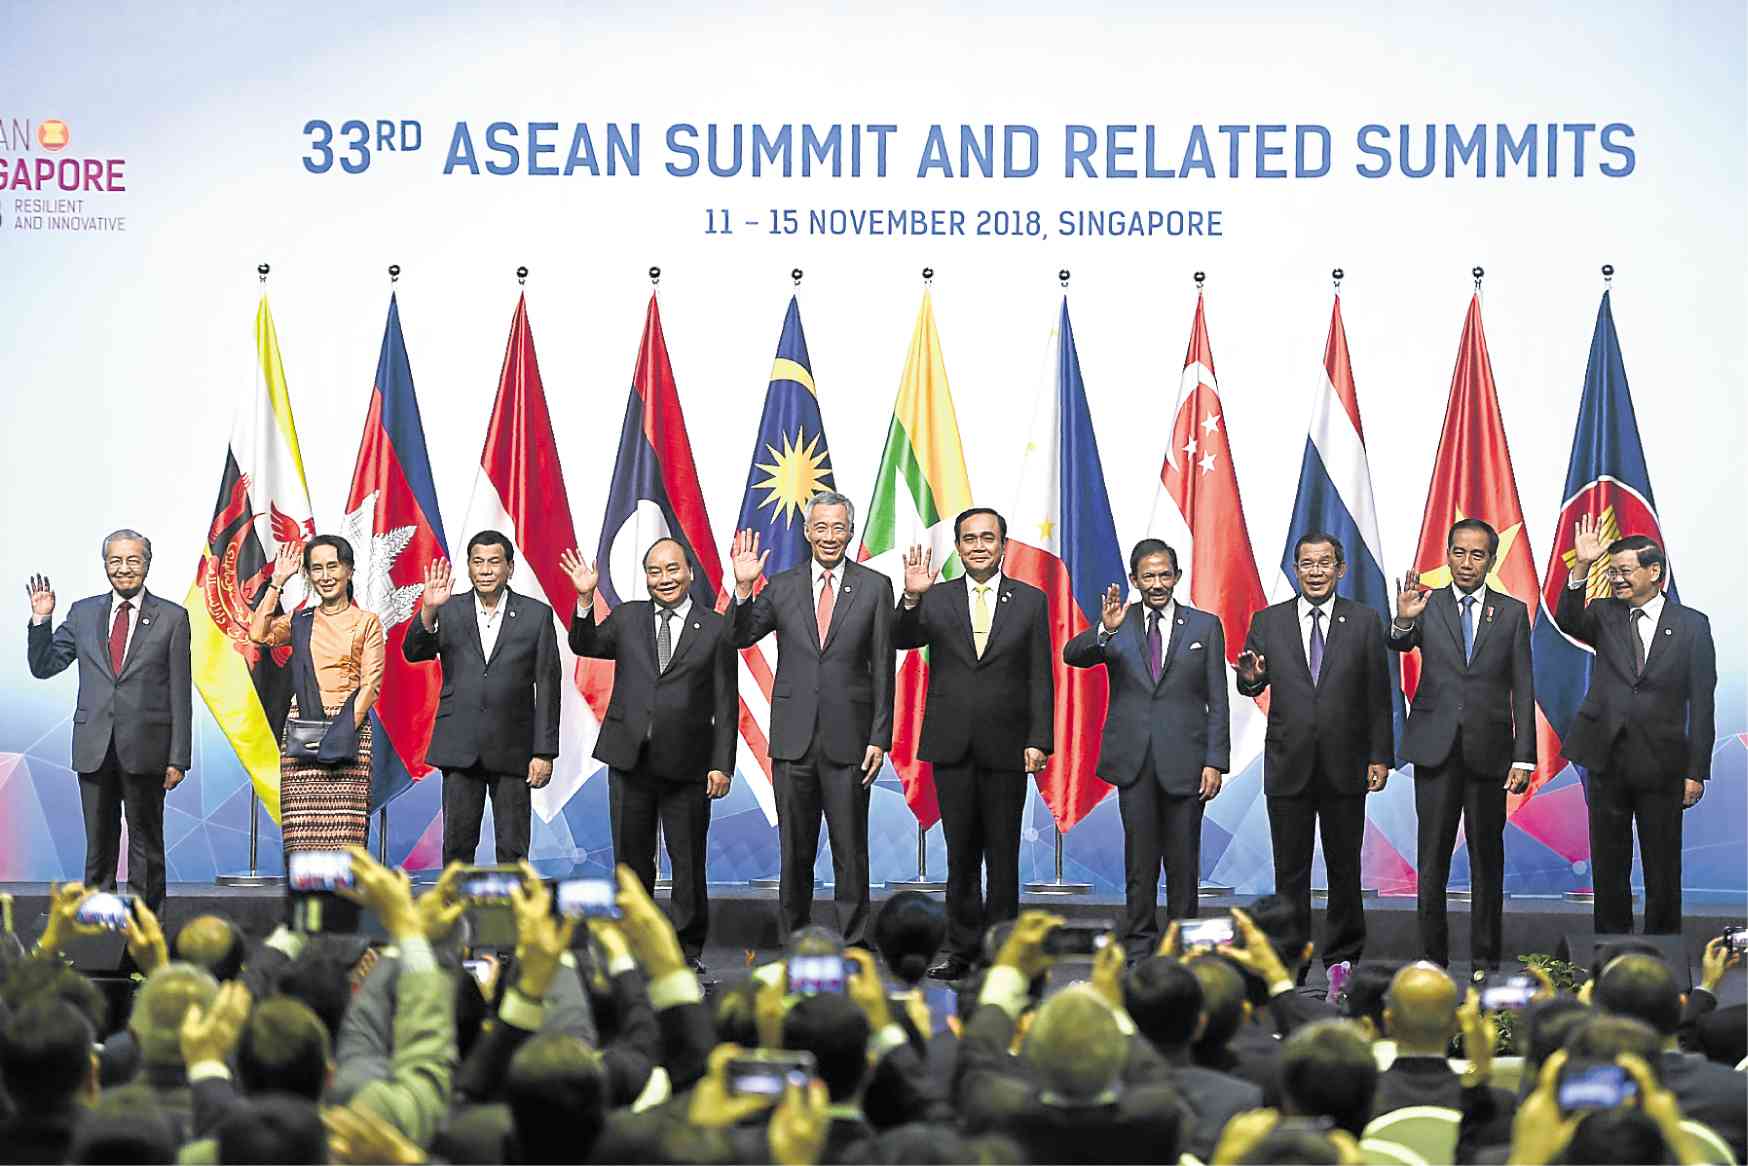 STRONG TALK ABOUT FREE TRADE Members of the Association of Southeast Asian Nations, many of which rely on trade to grow their economies, are responding to US President Donald Trump’s tariff battle with China with strong talk about free trade at the Asean Summit in Singapore. —AFP